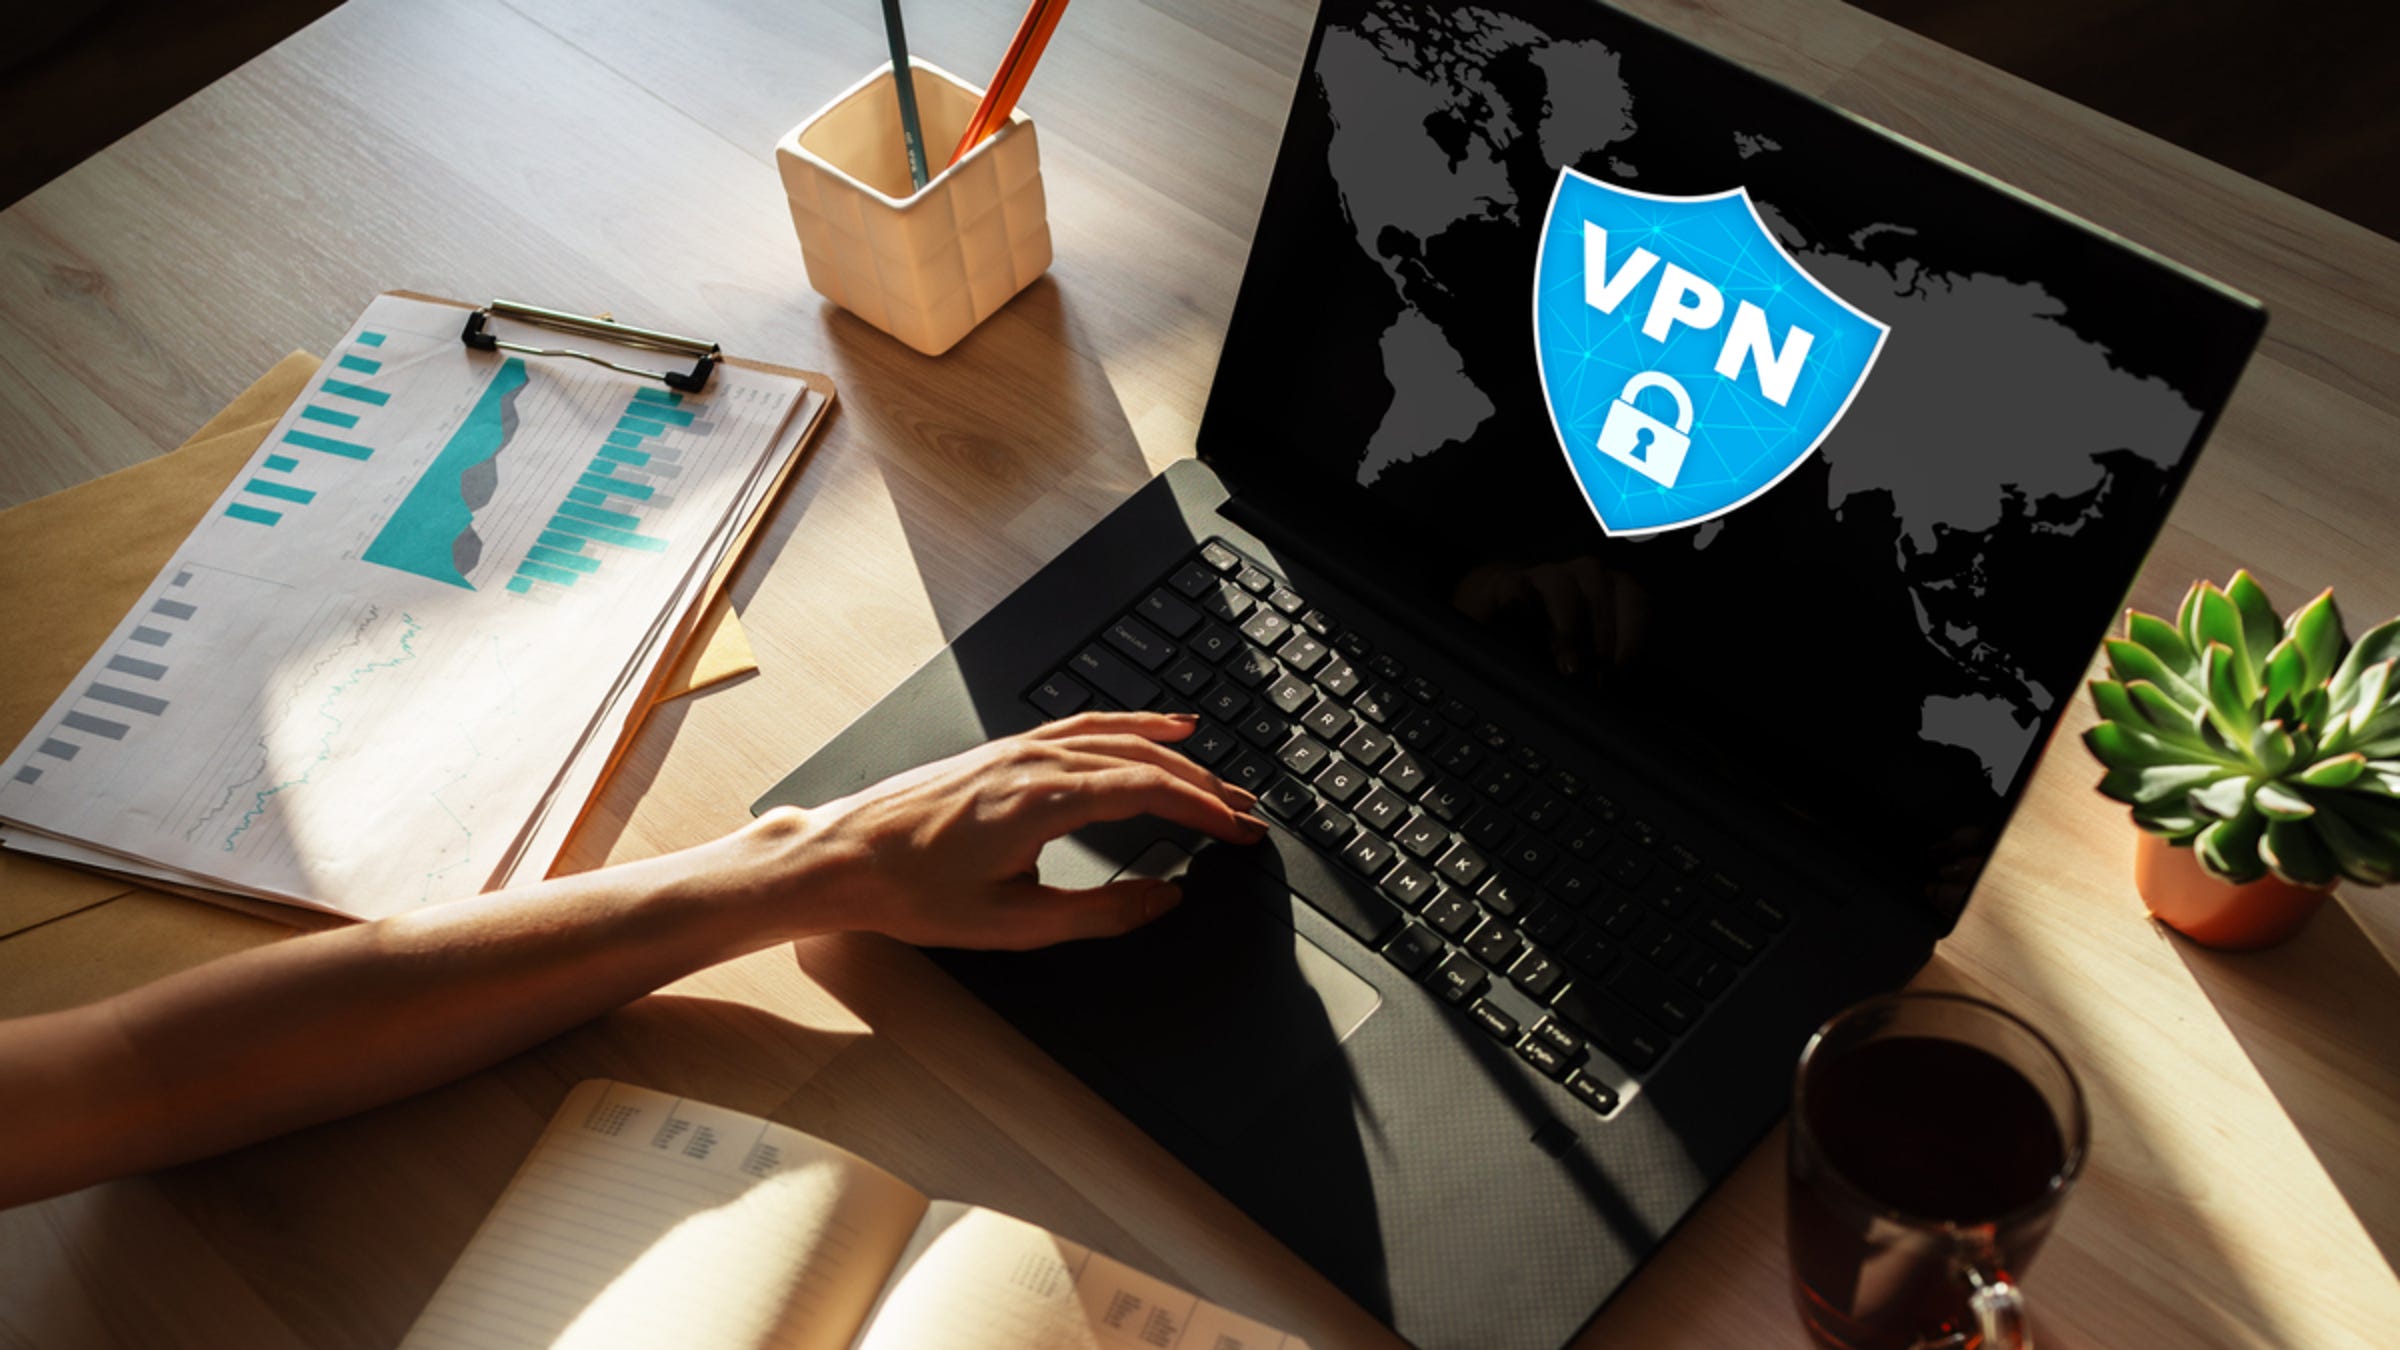 What Is a VPN, and Why Would I Need One?